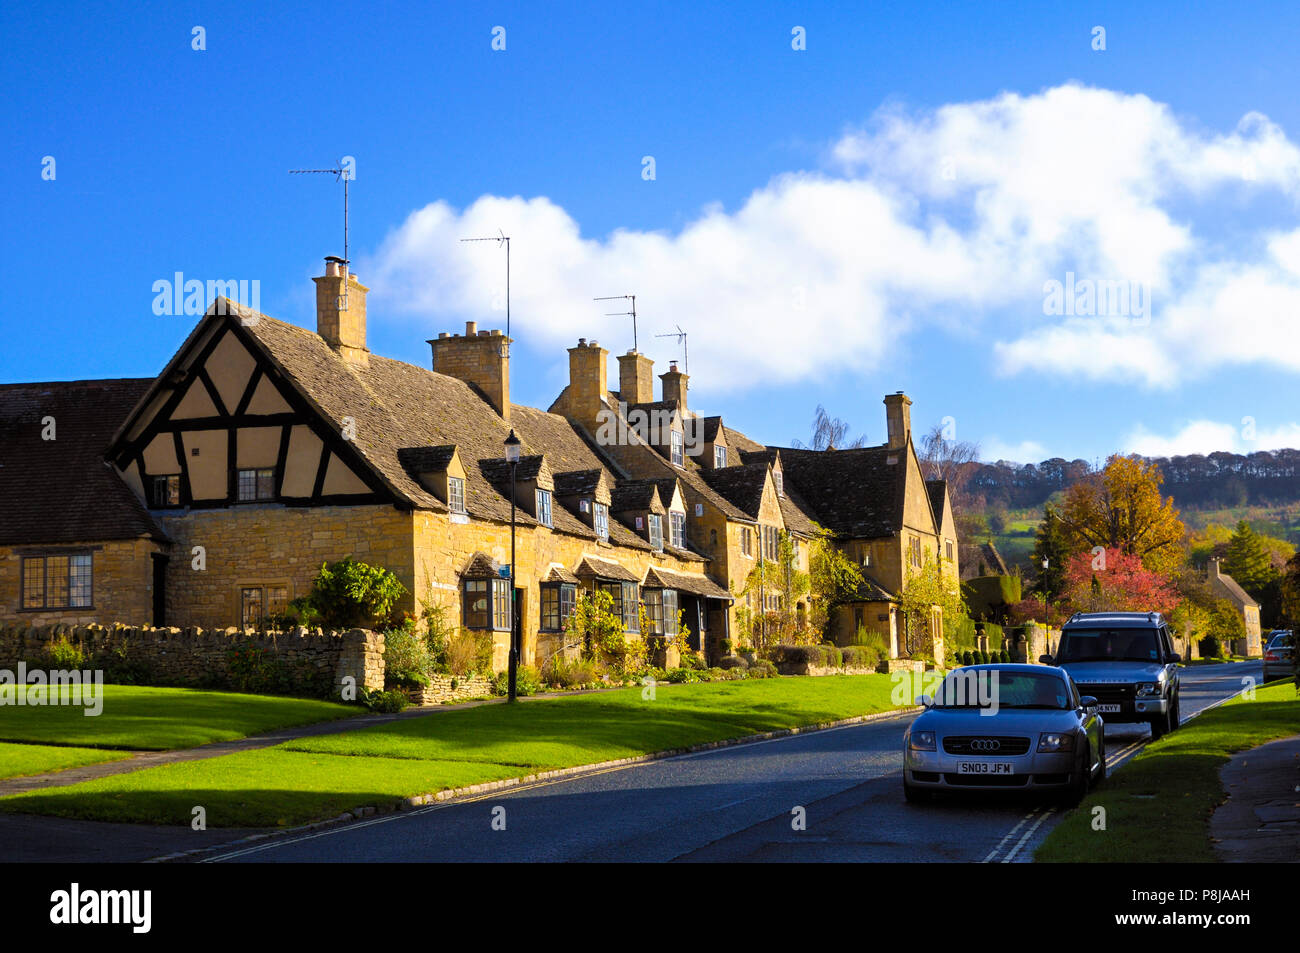 Traditional honey-coloured limestone cottages in the quaint Cotswold village of Broadway, Cotswolds, Worcestershire, England, UK Stock Photo